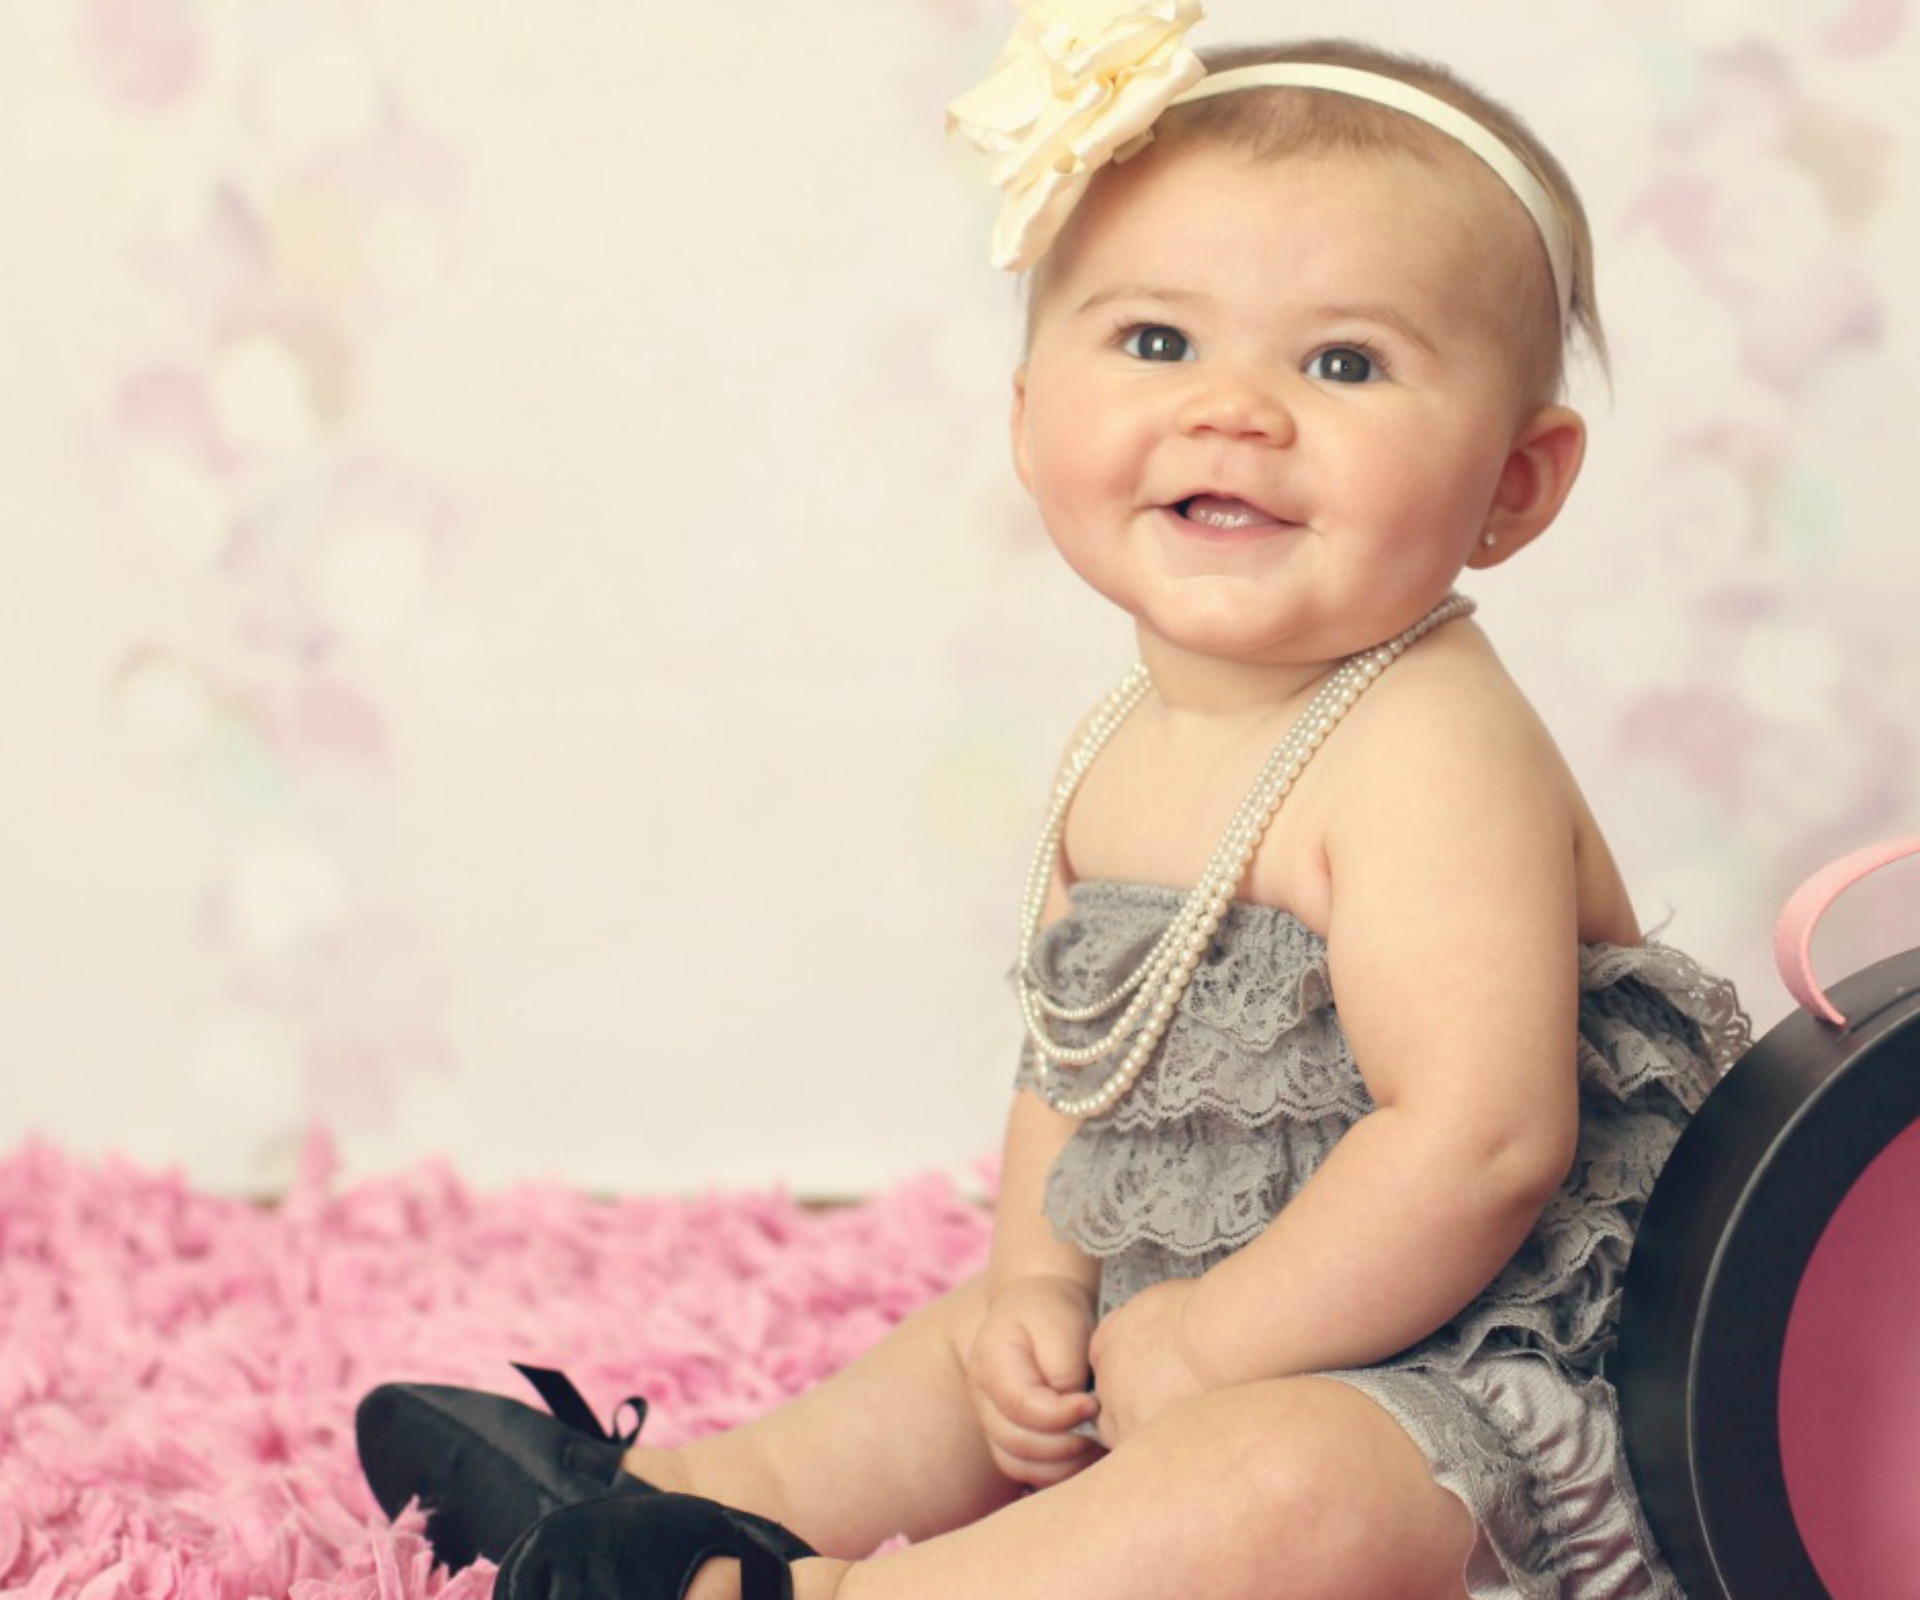 Stop the world: High heels for babies have arrived